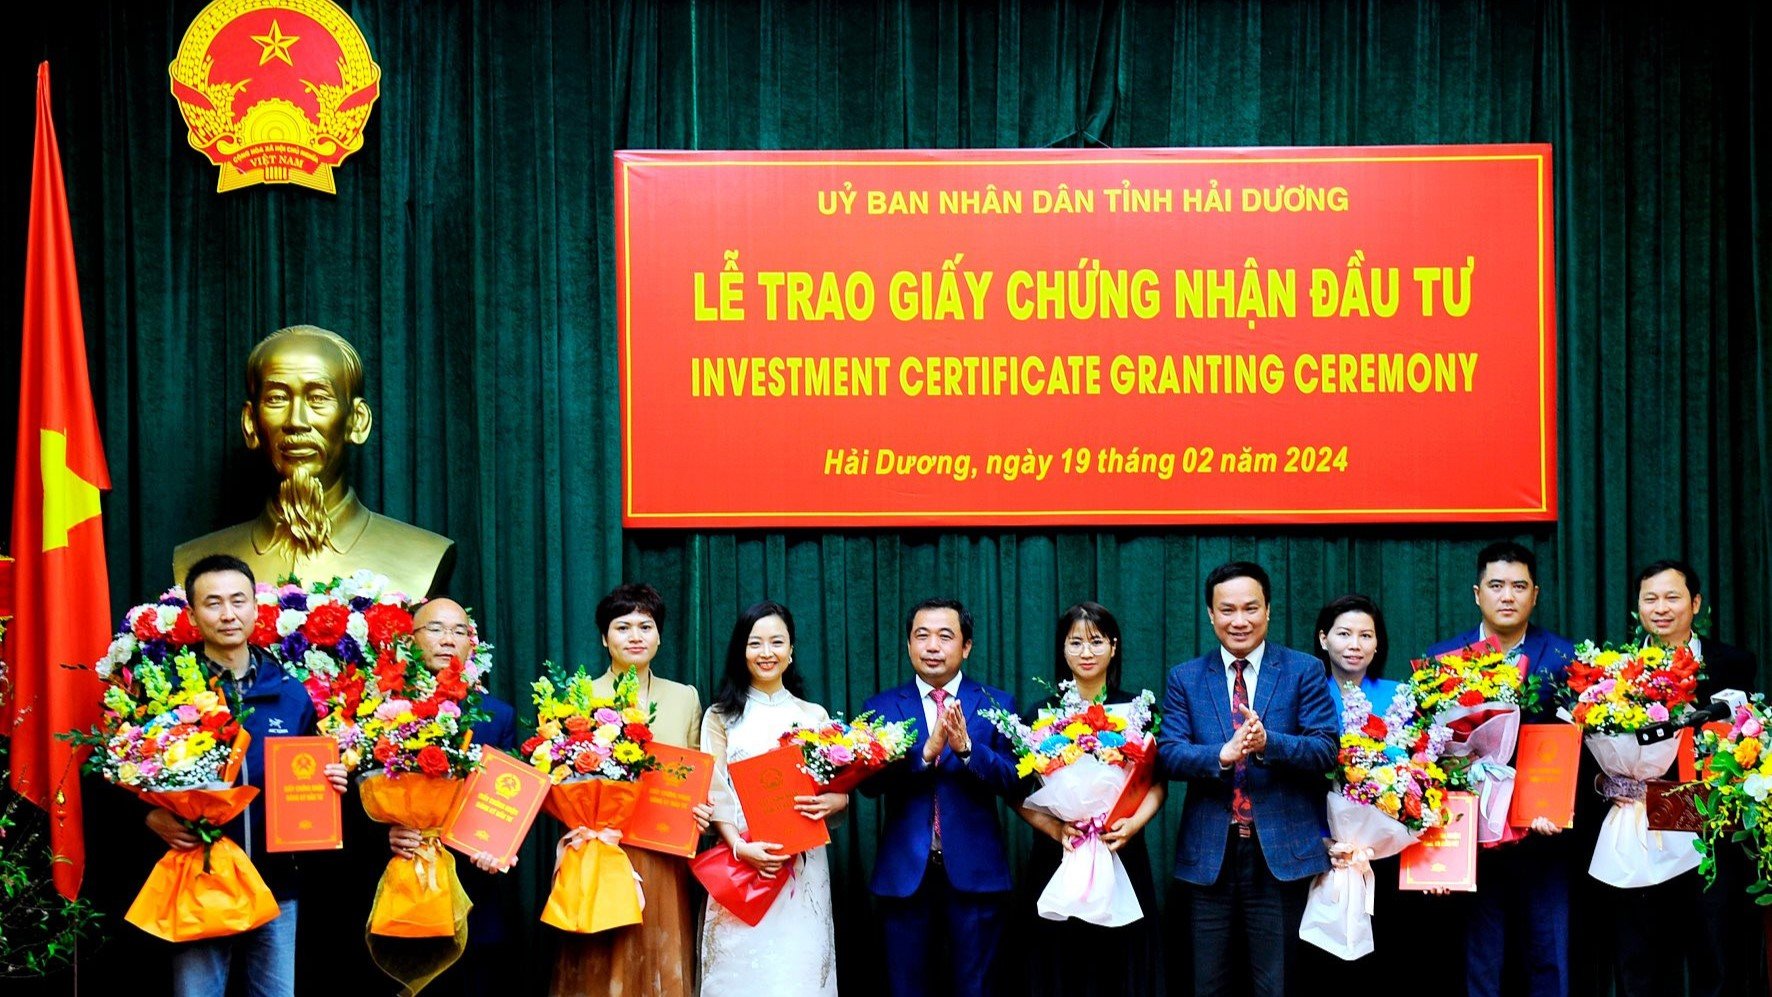 Hai Duong Chairman Trieu The Hung (right) and Tran Duc Thang, Secretary of the provincial Party Committee applaud the granting of investment certificates in Hai Duong province, northern Vietnam, February 19, 2024. Photo courtesy of Hai Duong newspaper.